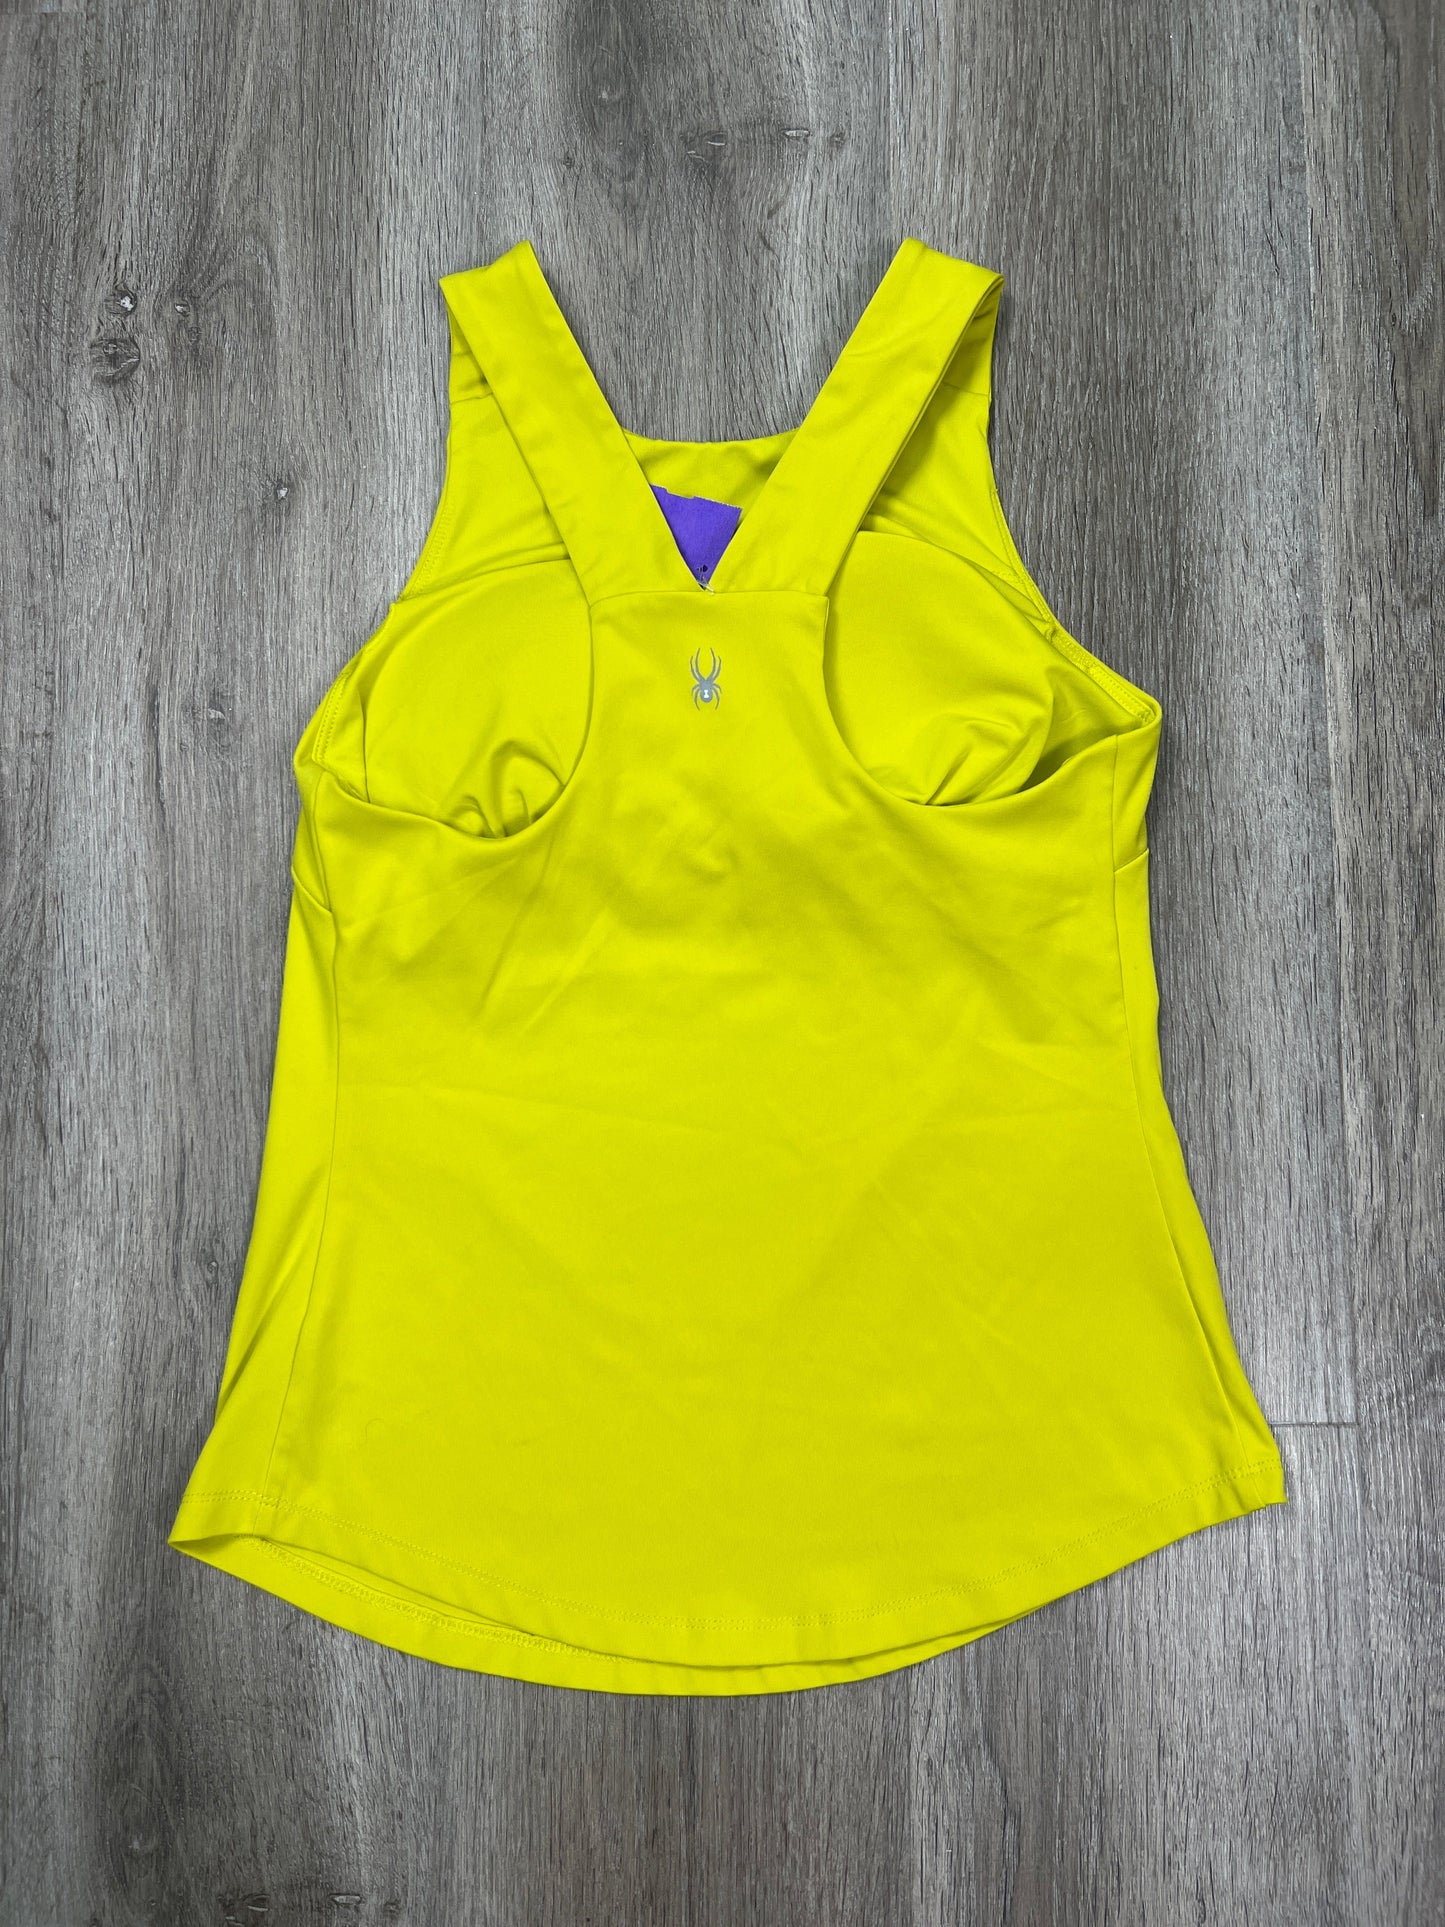 Athletic Tank Top By Spyder  Size: S